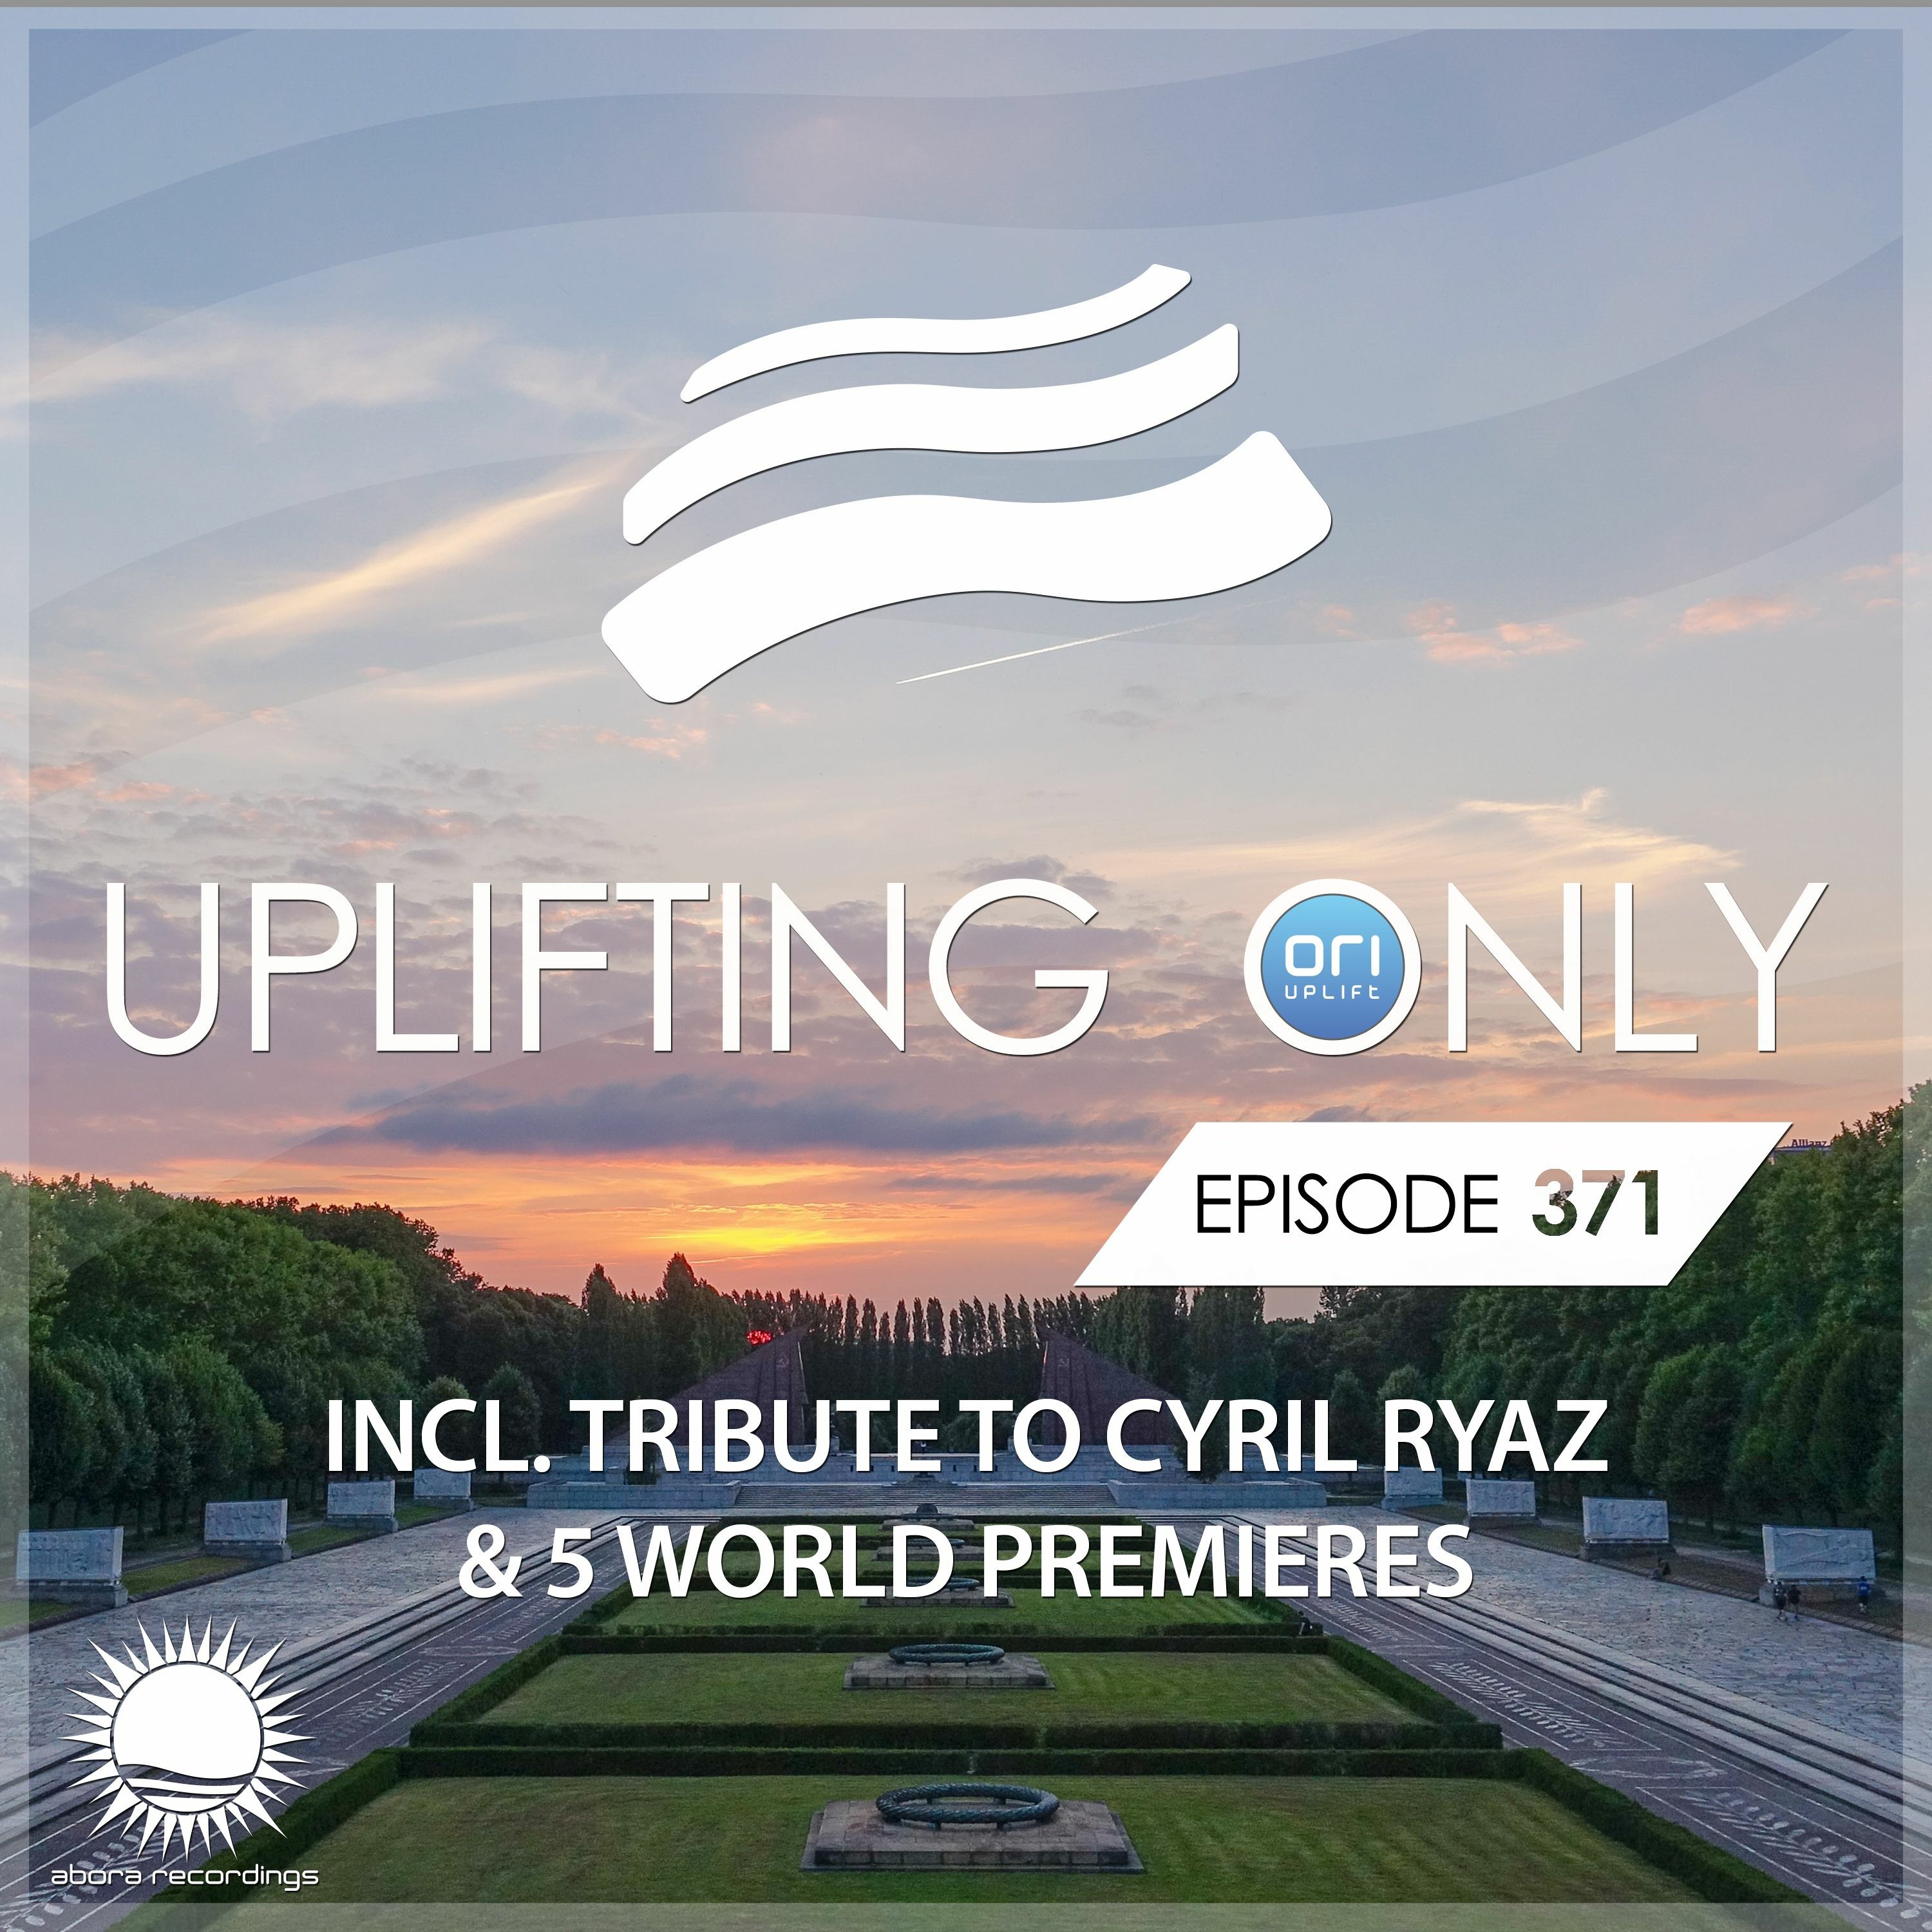 Uplifting Only 371 (March 19, 2020) (incl. Tribute To Cyril Ryaz)